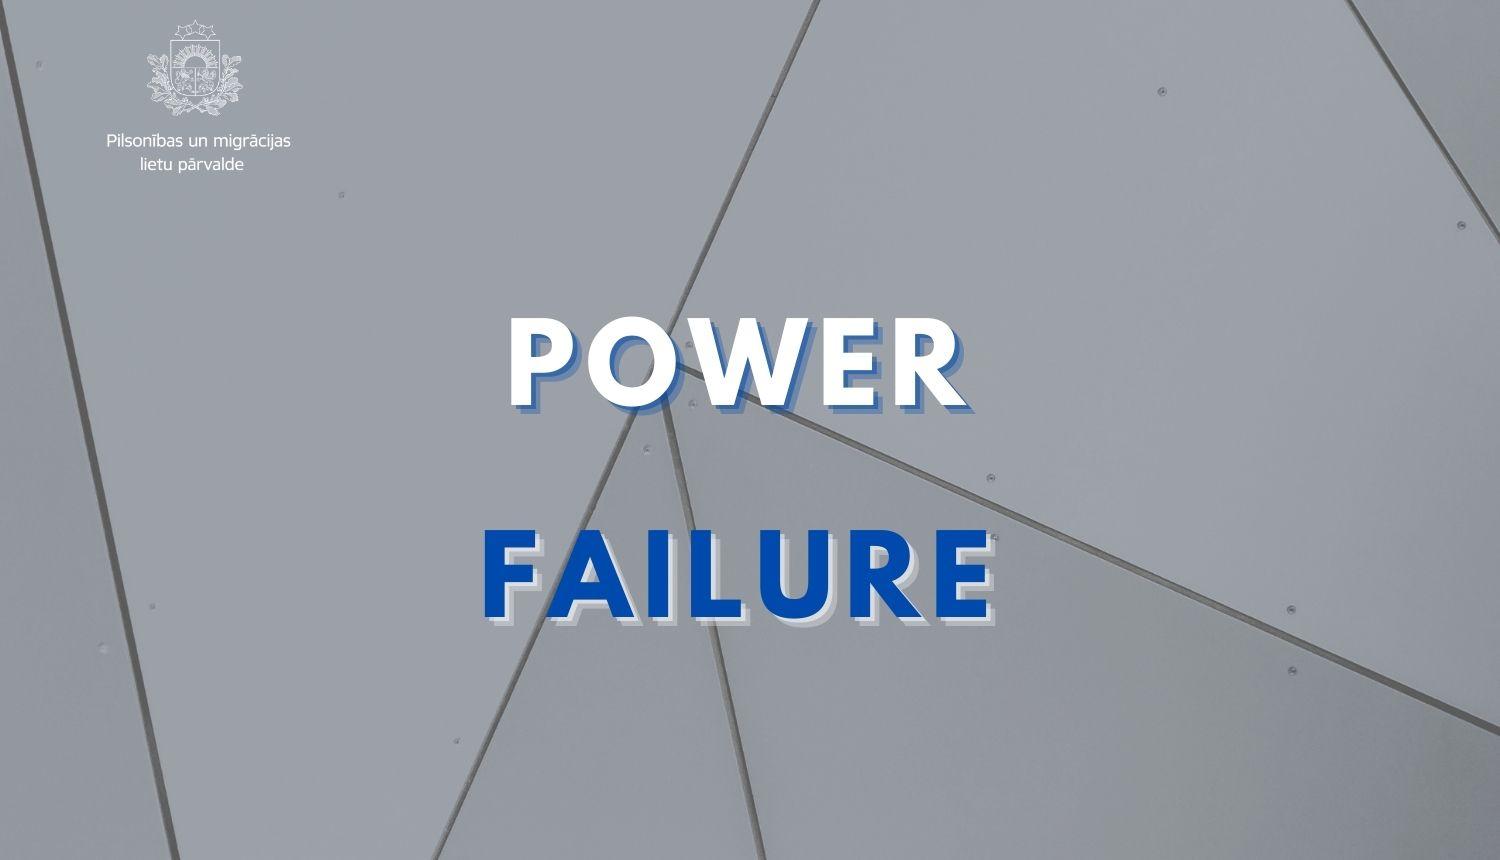 Text on gray background "Power failure"